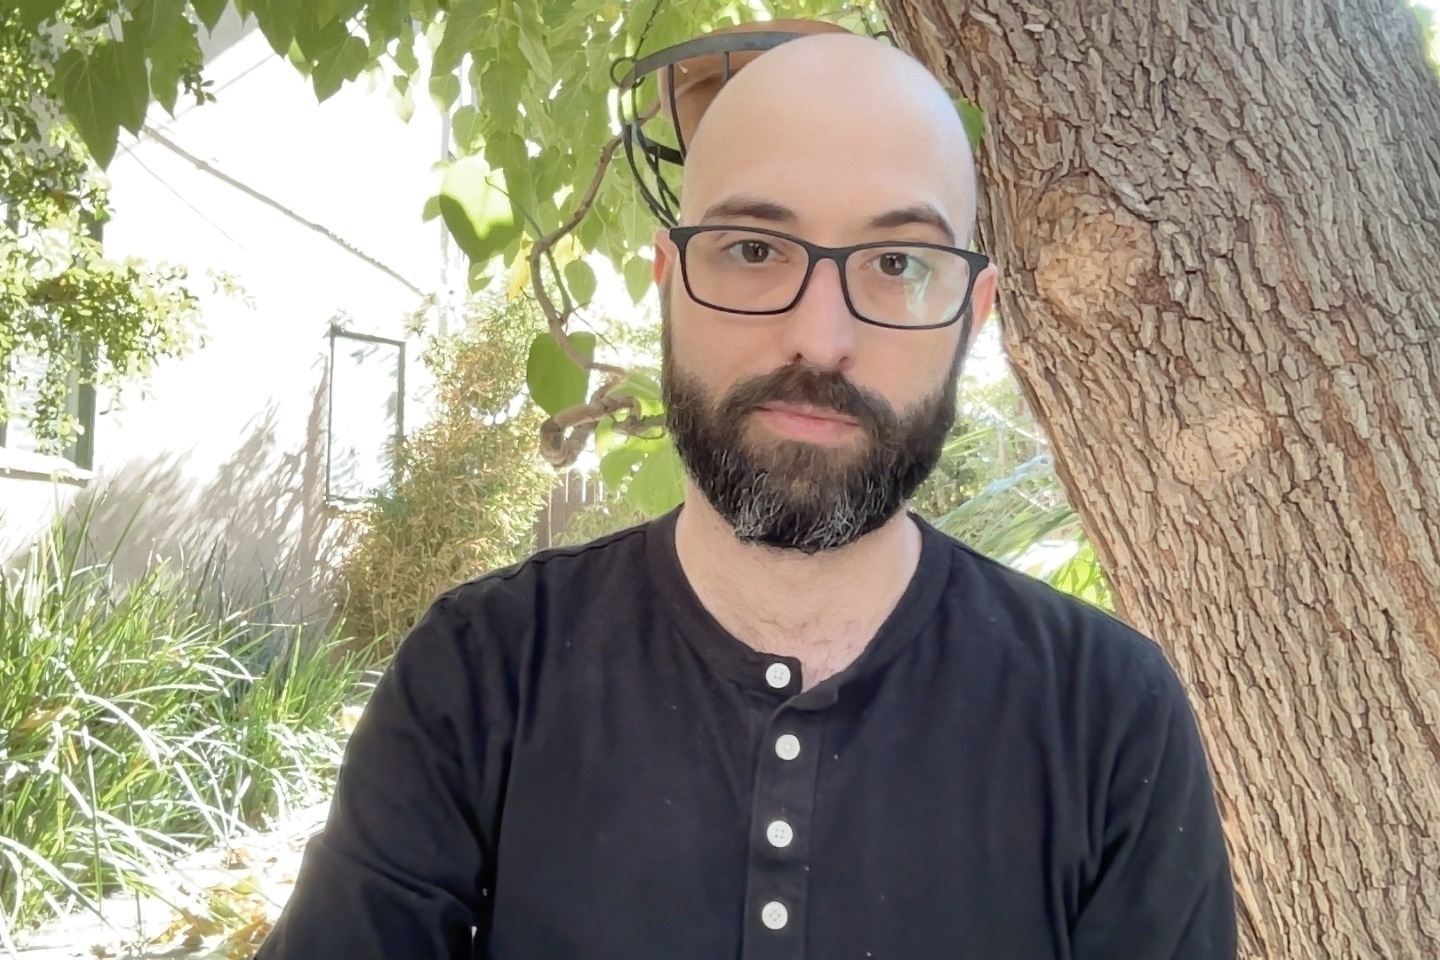 A photo of me, a bald, bearded white man. I’m sitting outside near a tree, sun speckles lighting everything up. My expression is almost blank, with a weird-ass hint of a smile. I’m creeped out of myself in retrospect.